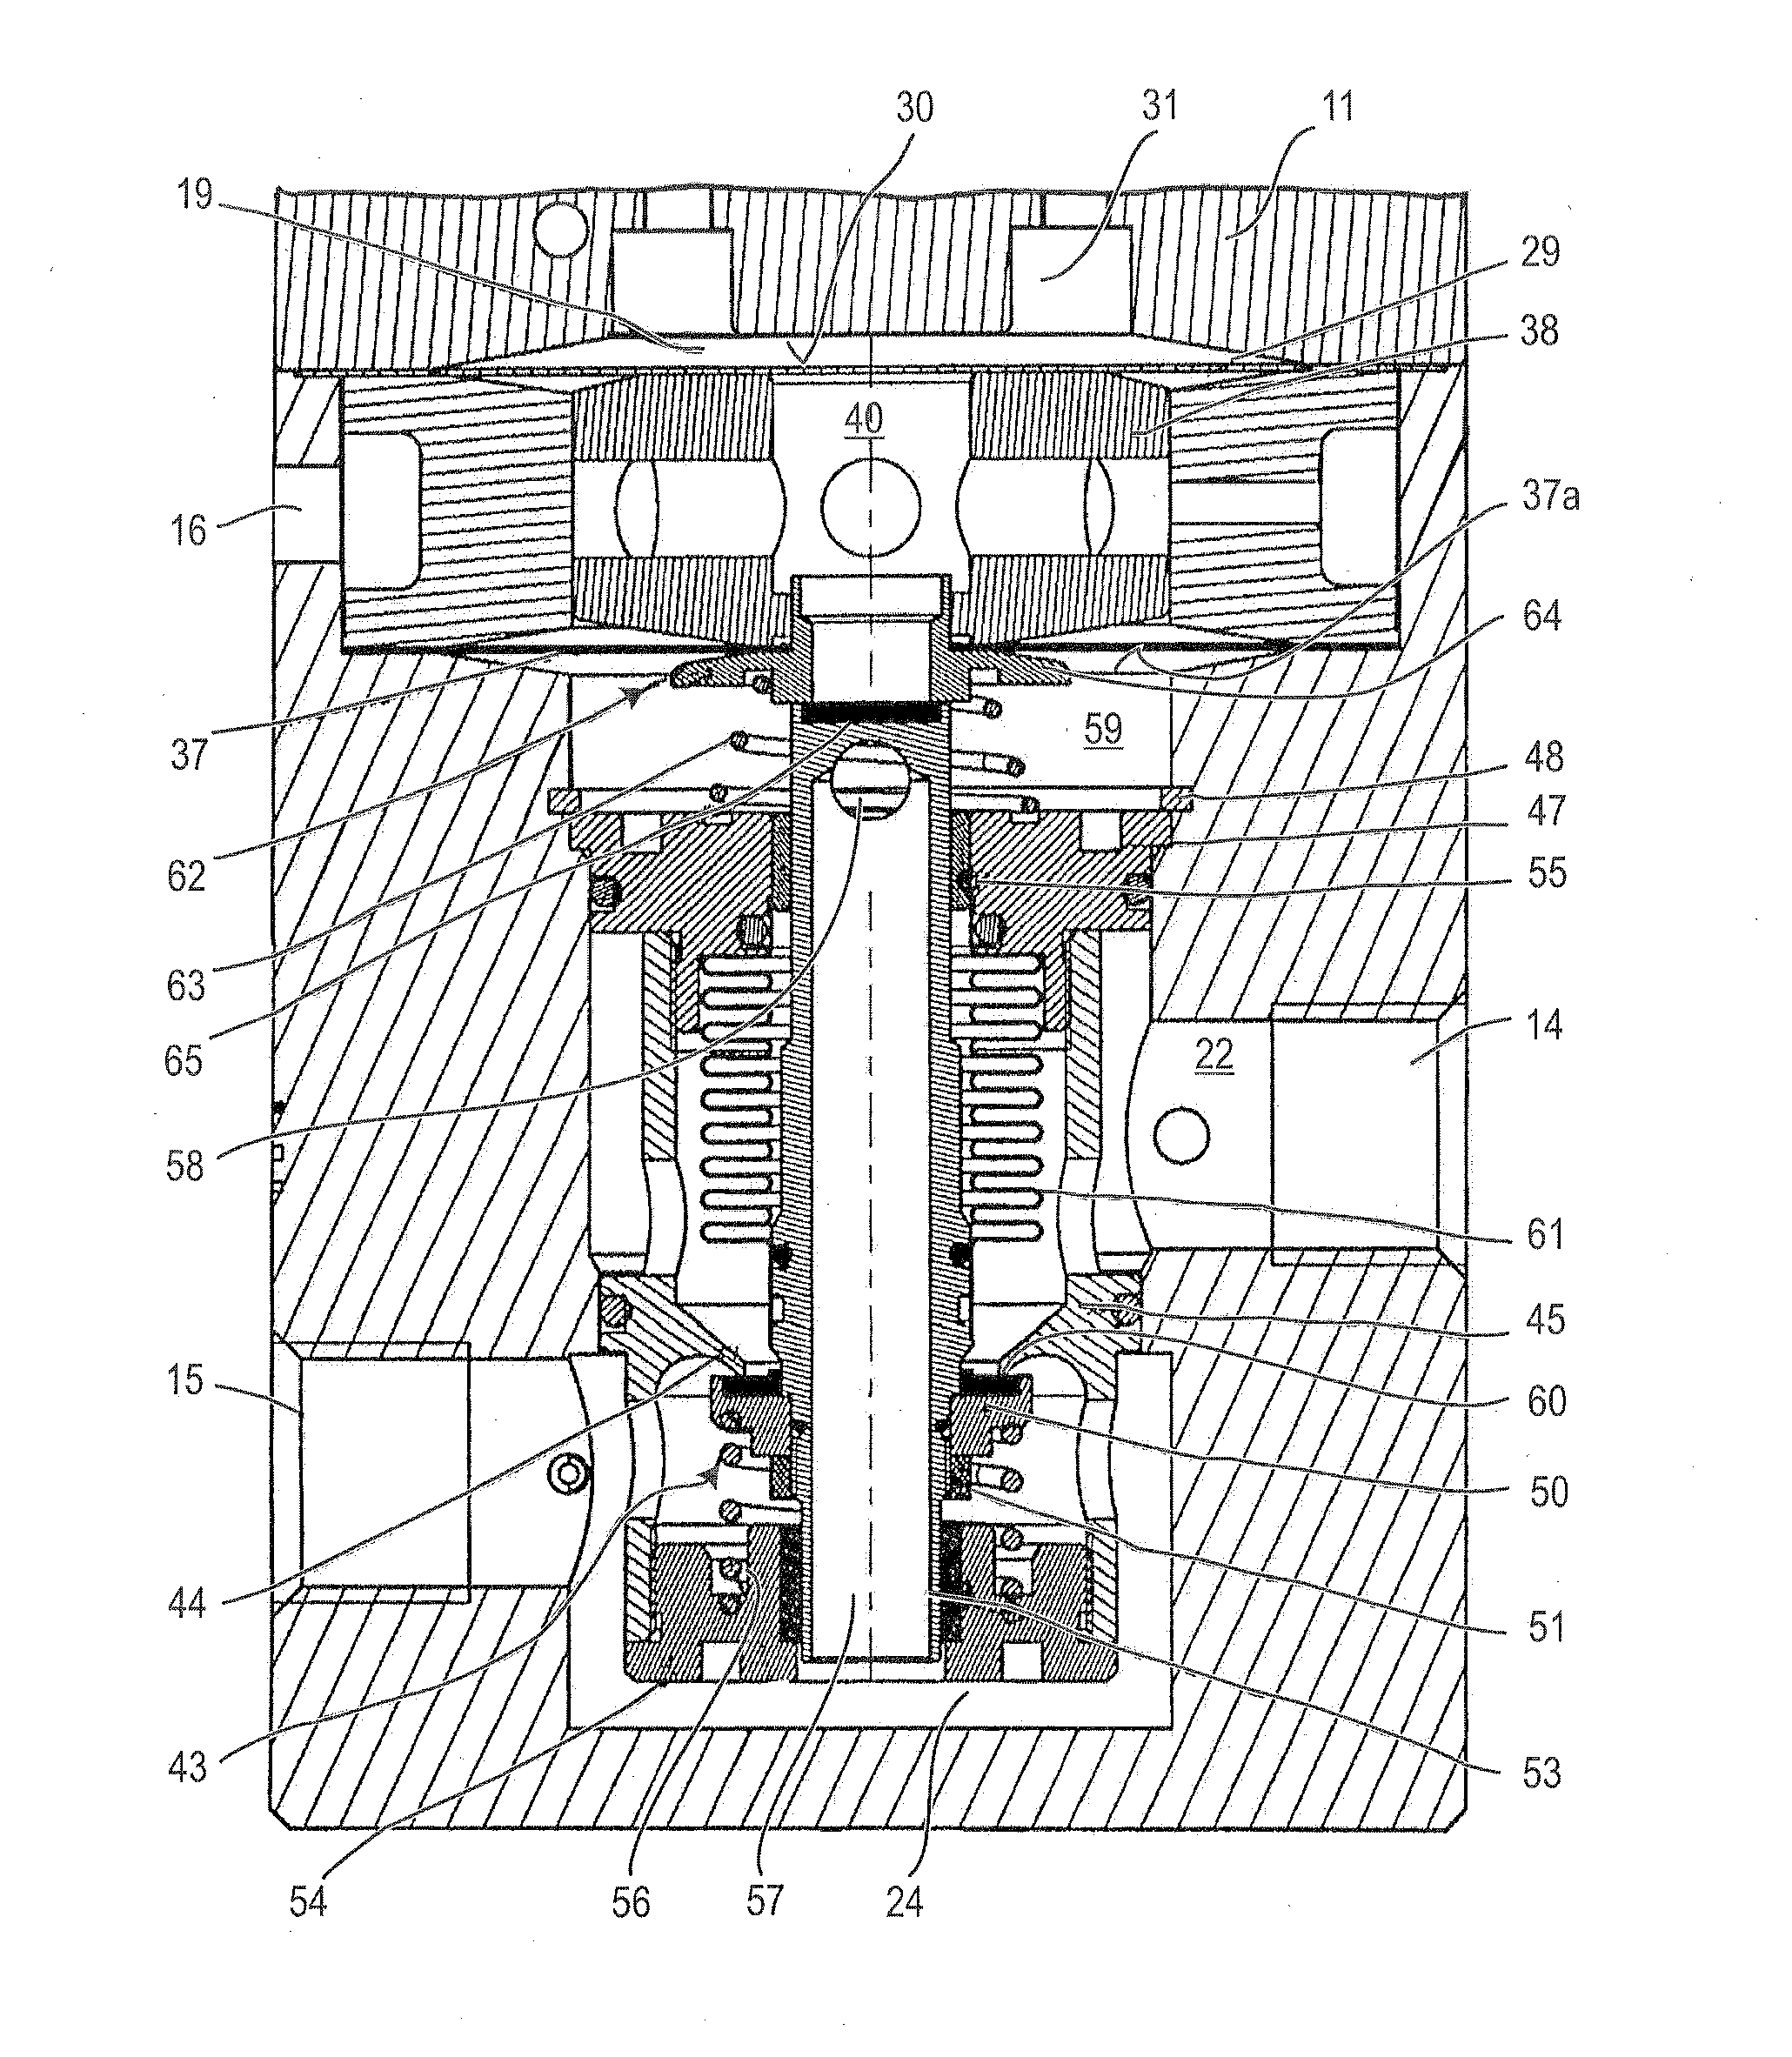 Device for providing a fluid having regulated output pressure